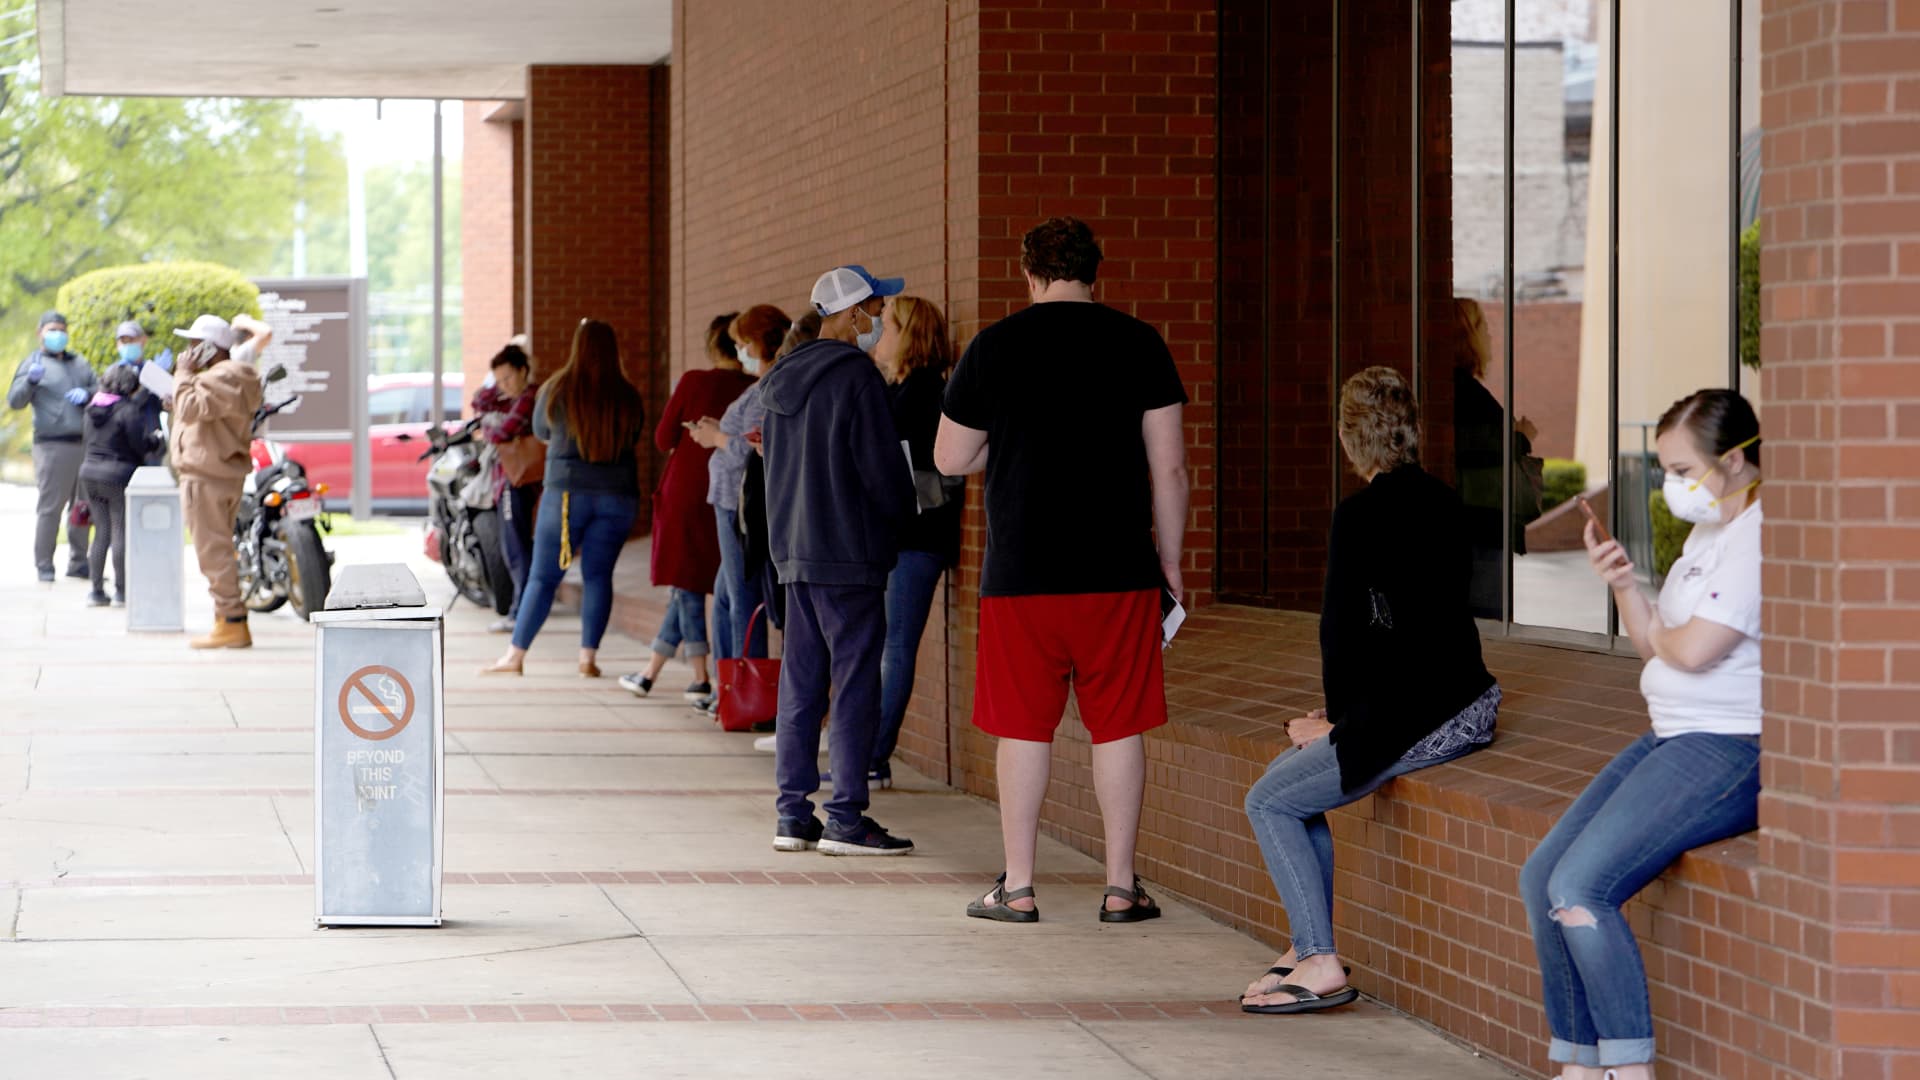 People who lost their jobs wait in line to file for unemployment following an outbreak of the coronavirus disease (COVID-19), at an Arkansas Workforce Center in Fort Smith, Arkansas, U.S. April 6, 2020.